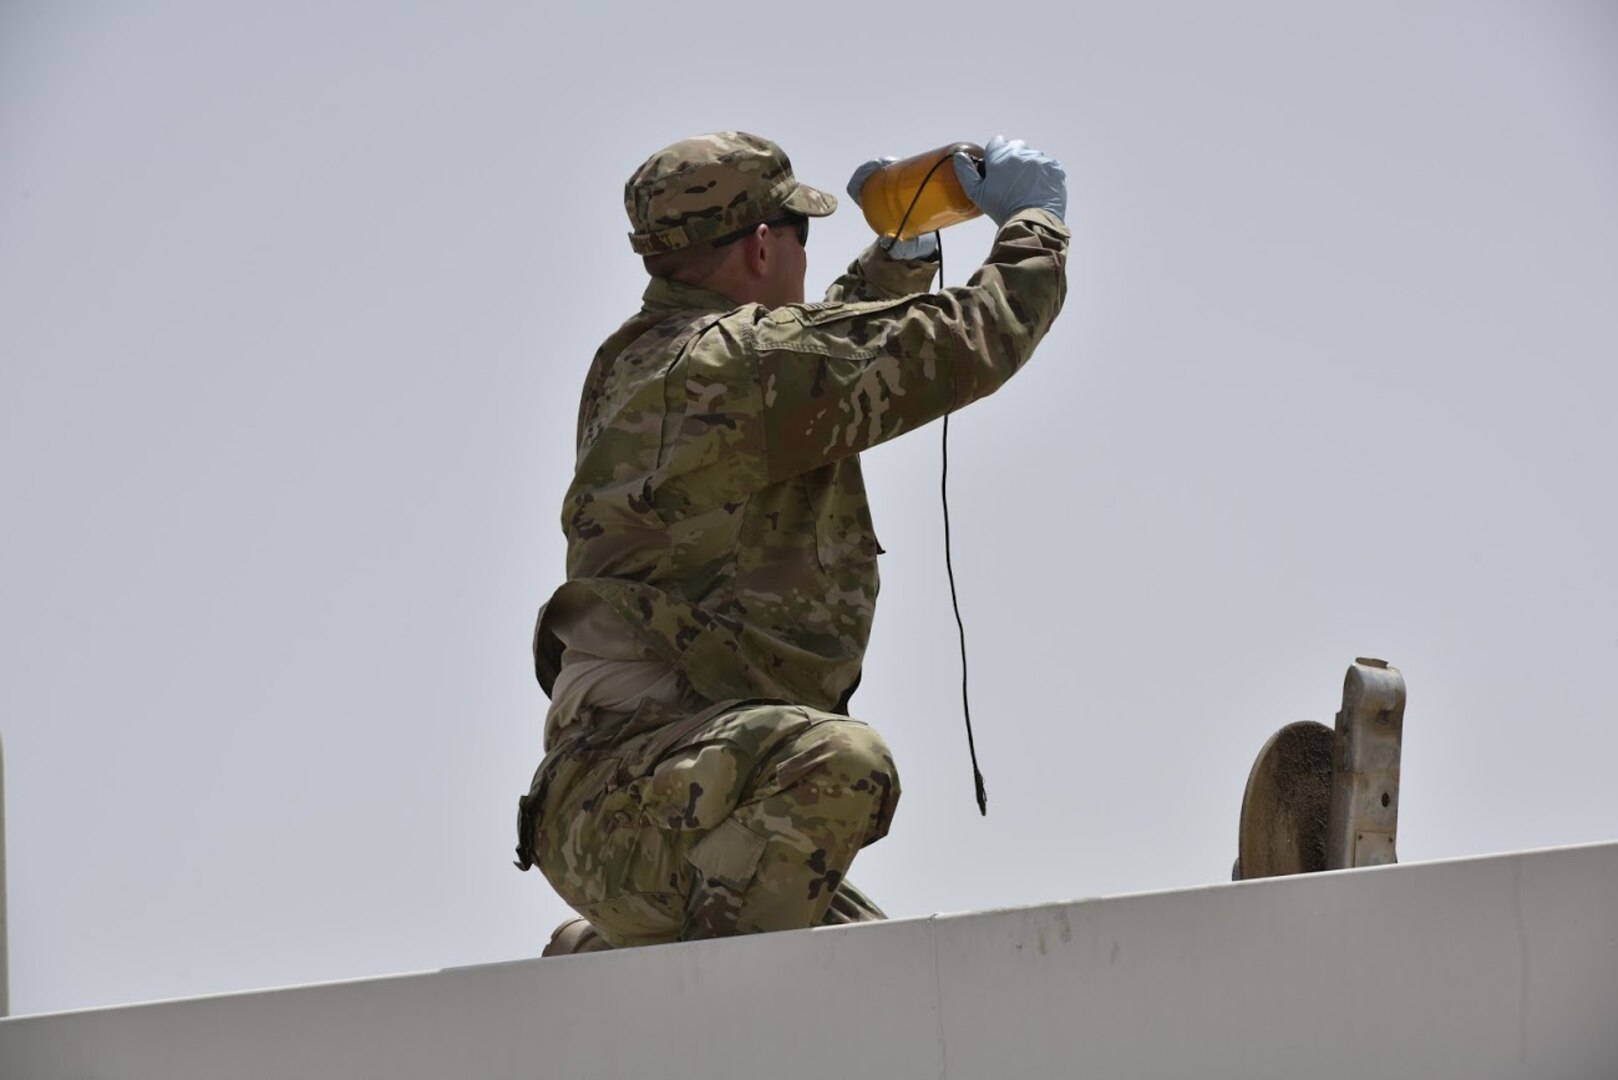 Staff Sgt. Samuel Bonhorst, 407th Expeditionary Logistic Readiness Squadron petroleum, oil and lubricants flight fuels laboratory NCO in charge, inspects a sample of fuel before receiving a shipment May 10, 2017, in Southwest Asia. Fuel technicians maintain all POL substances, from diesel and gasoline to jet fuel and liquid oxygen. These materials play a vital role in delivering airpower to the fight against ISIS. The team here at the 407th Air Expeditionary Group supplies U.S. Marine Corps and coalition aircraft. (U.S. Air Force photo by Senior Airman Ramon A. Adelan)